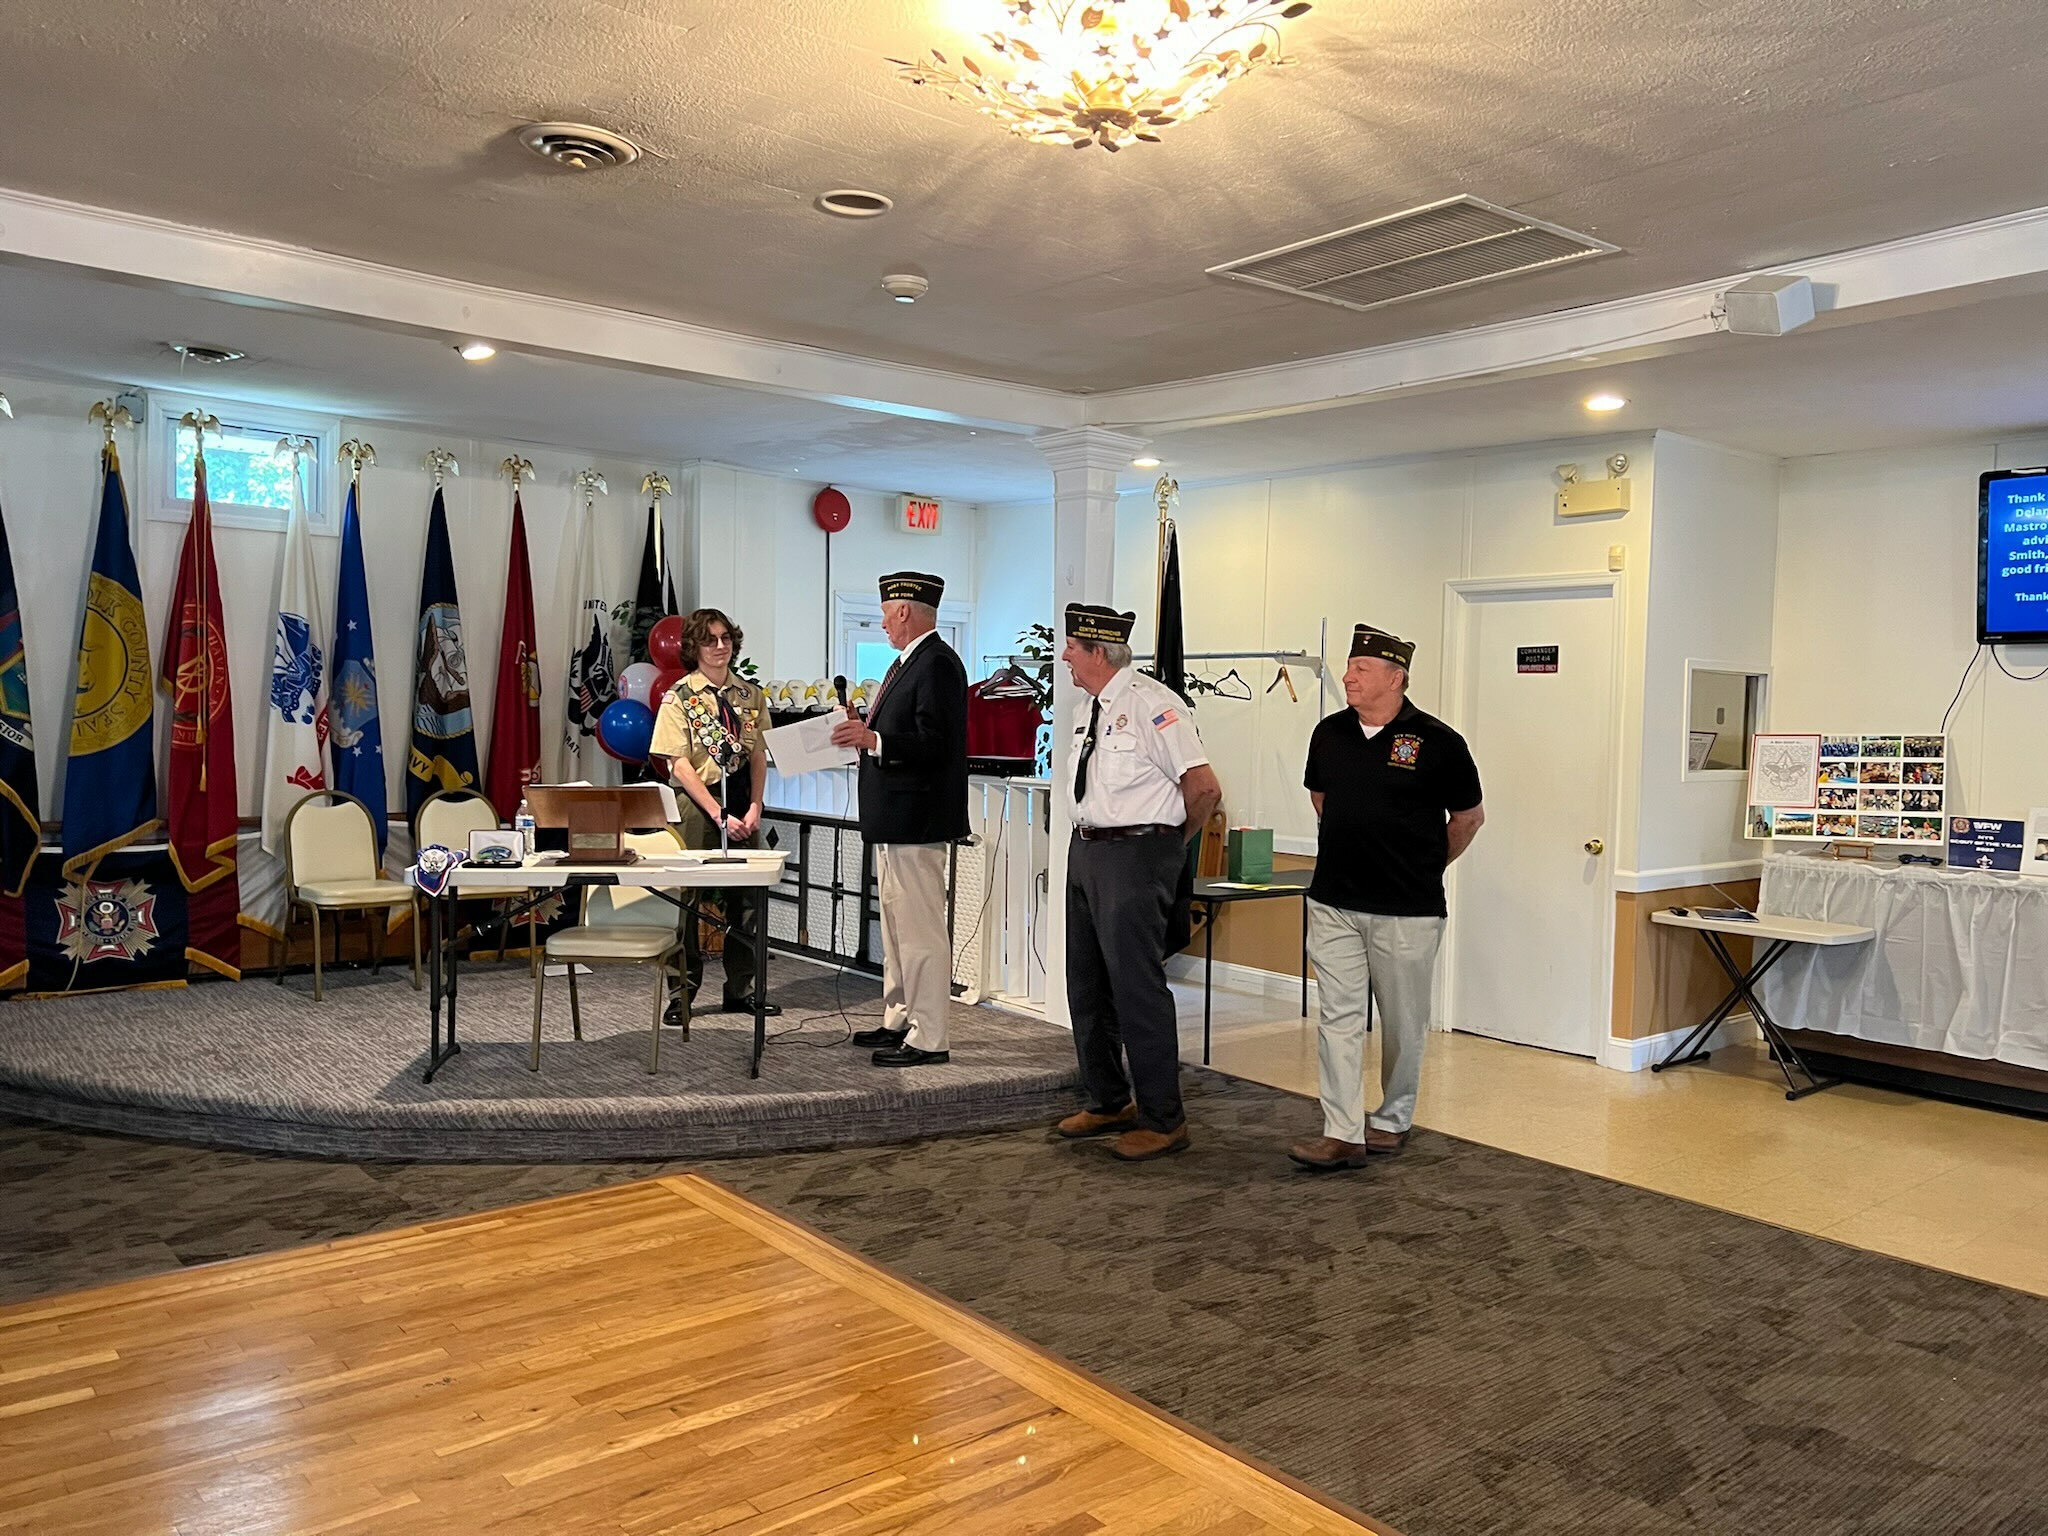 On May 1, an Eagle Court of Honor was held at VFW Post 414 in Center Moriches honoring Louis Mattiolo of Troop 62 in Westhampton Beach, who has also been selected as the VFW Department of NY Scout of the Year.  From left, Mattiolo; Al Sparrow Post Trustee Post 5350; Bob Galbraith Post Commander Post 414 and Louis Bahr Past Post Commander Post 414. COURTESY WILLIAM HUGHES